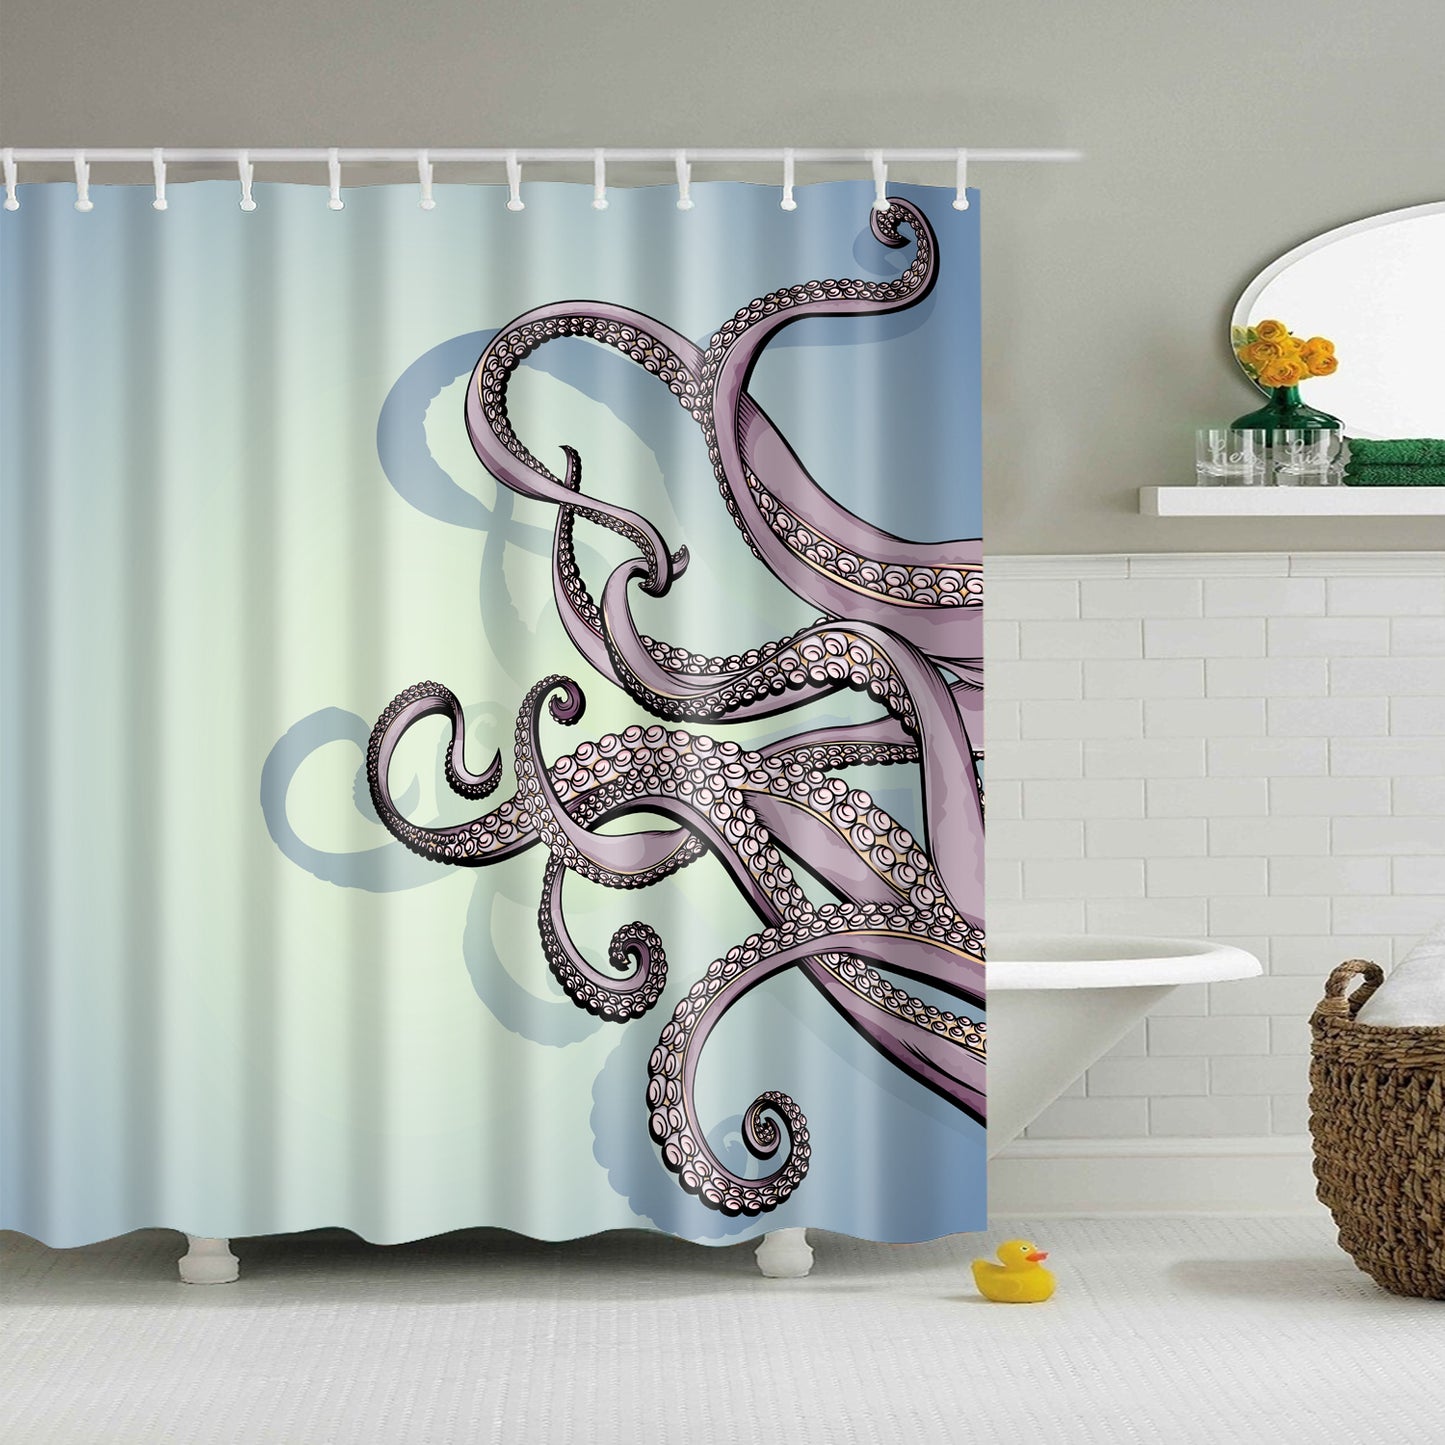 Hard Drawing Octopus Sketch Tentacles Shower Curtain